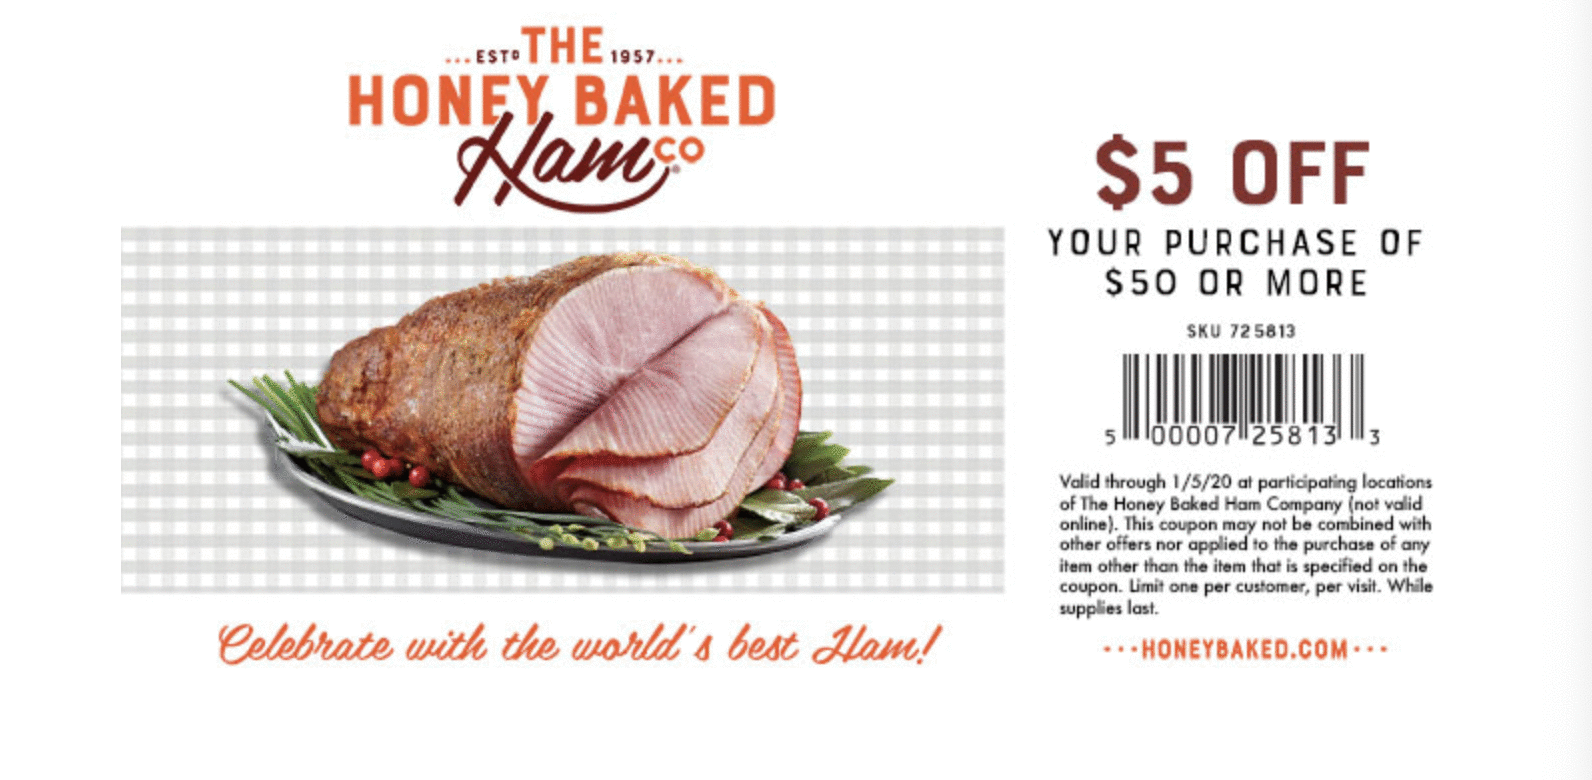 $5 OFF HoneyBaked Ham Coupons, Promo Codes December 2020